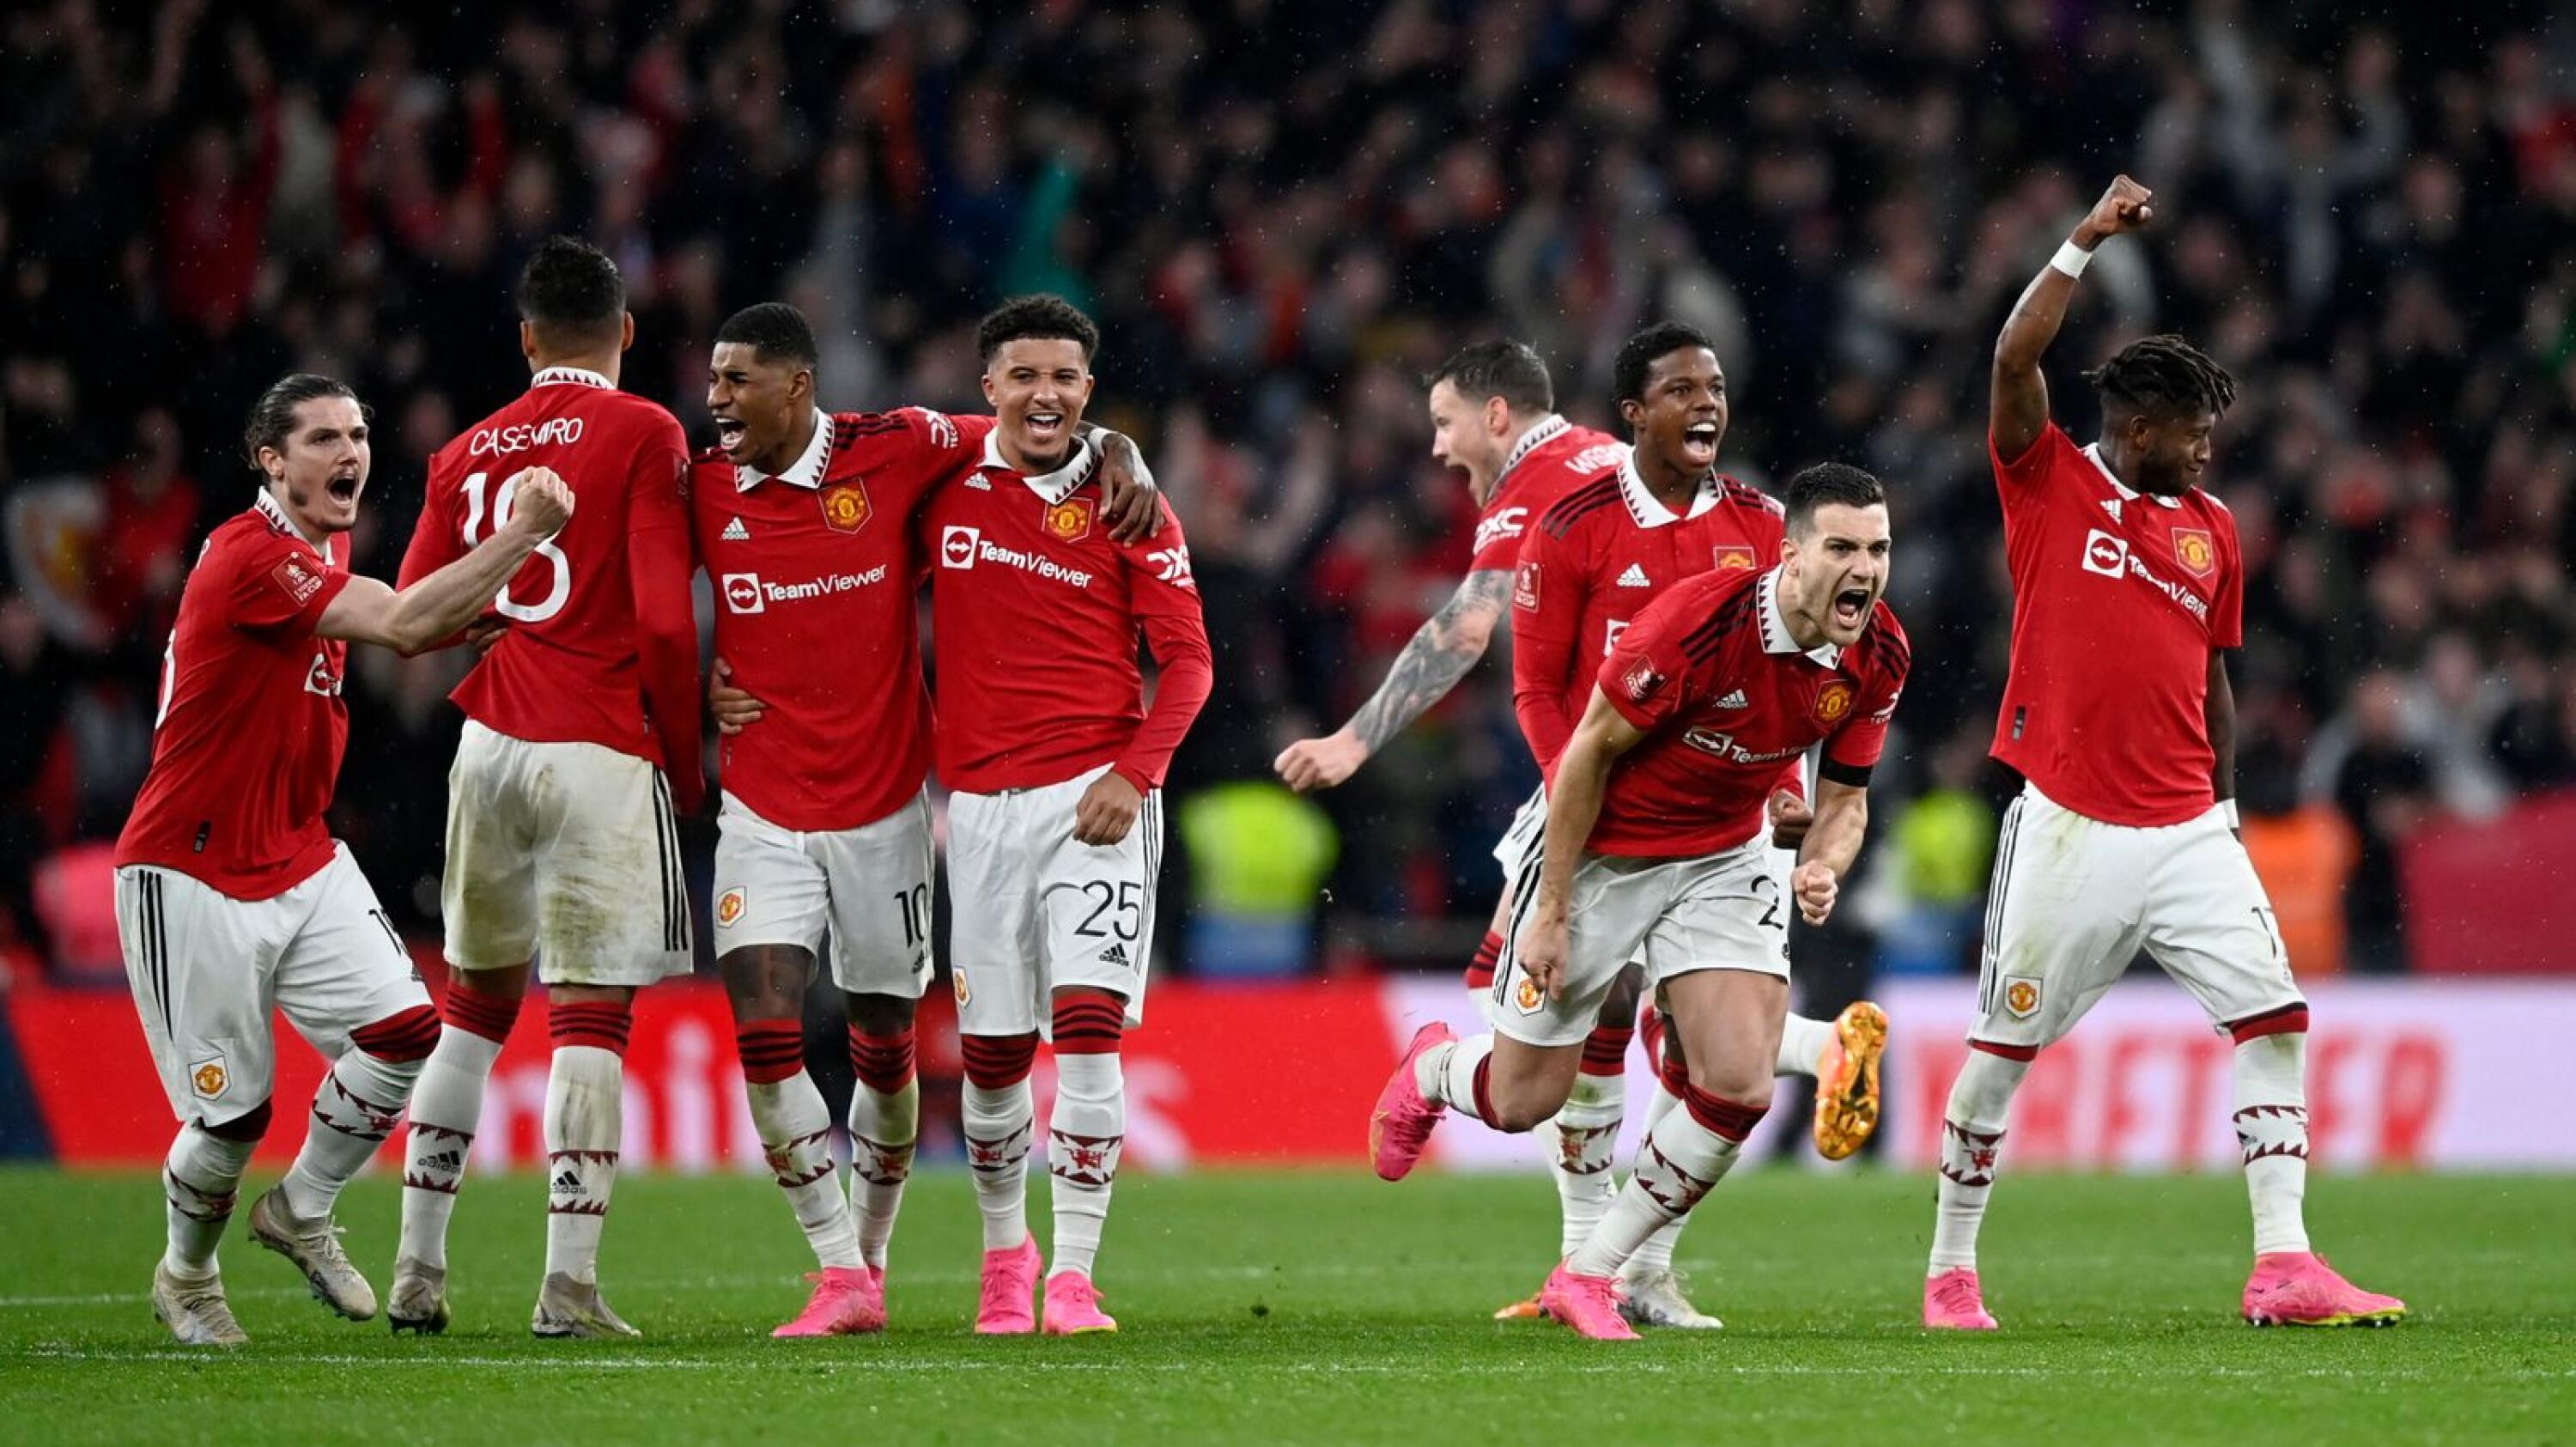 United players celebrate after winning a penalty shootout against Brighton on Sunday.